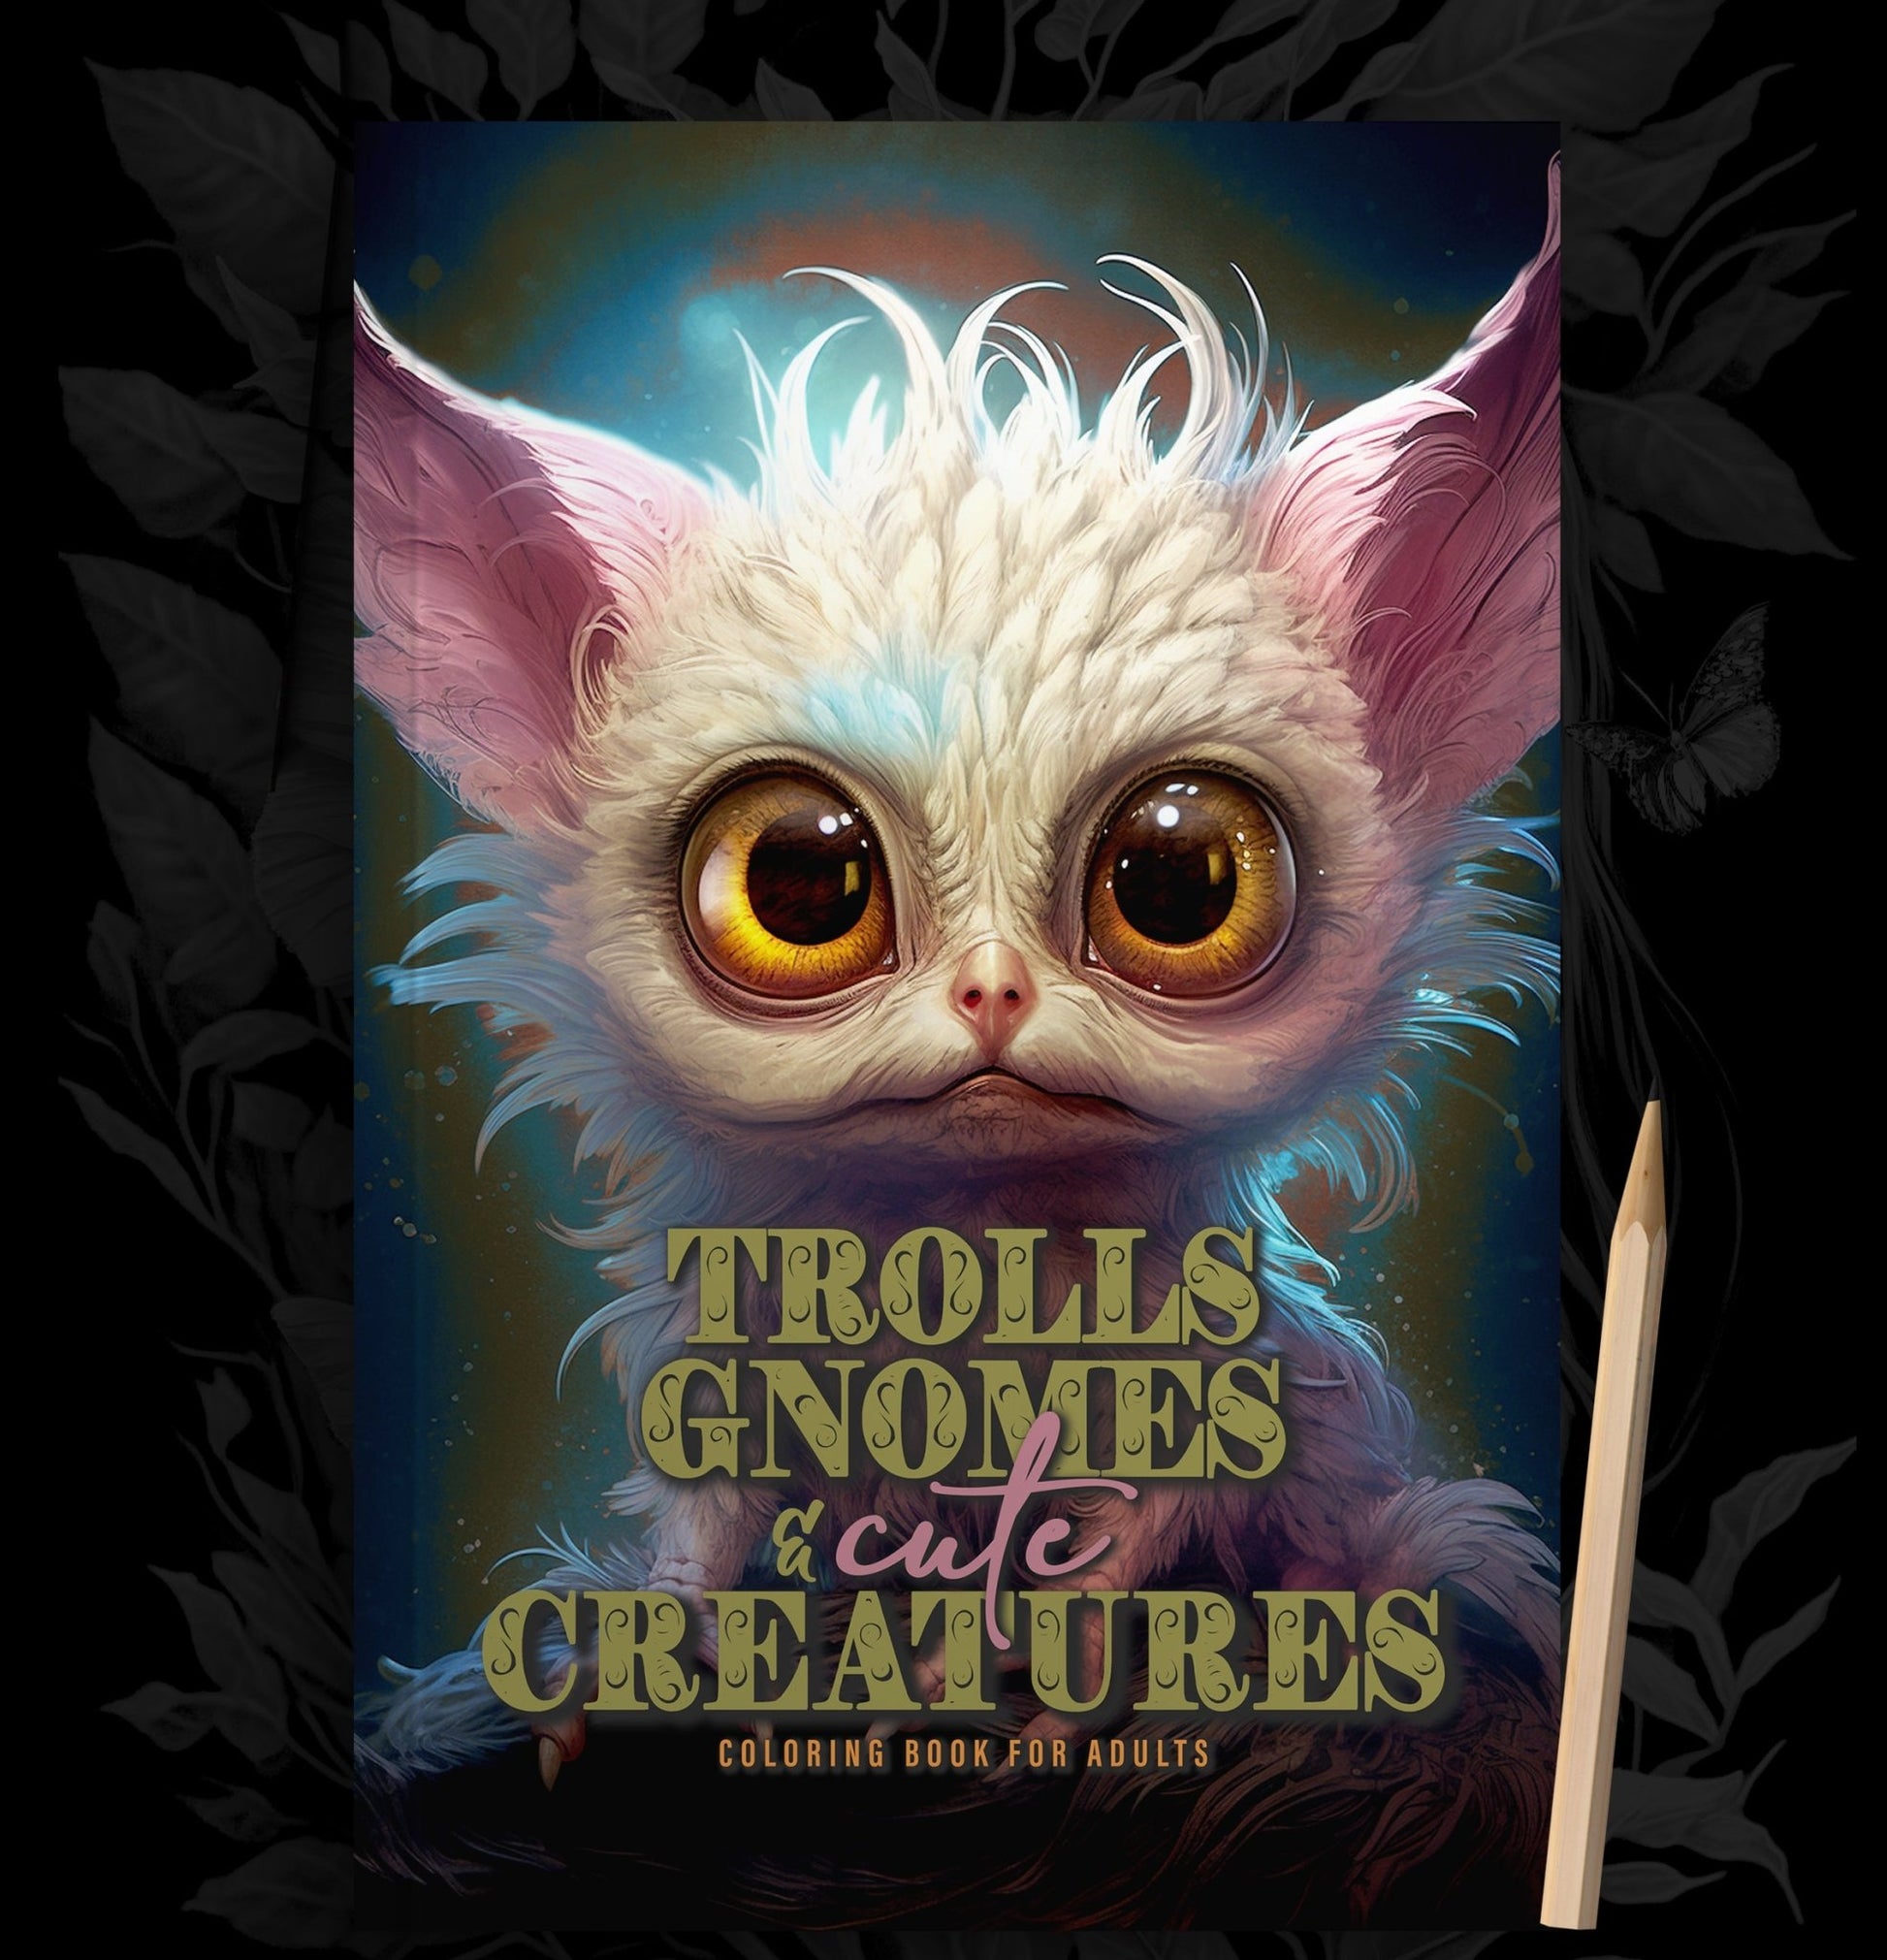 Trolls Gnomes and Creatures Coloring Book (Printbook) - Monsoon Publishing USA